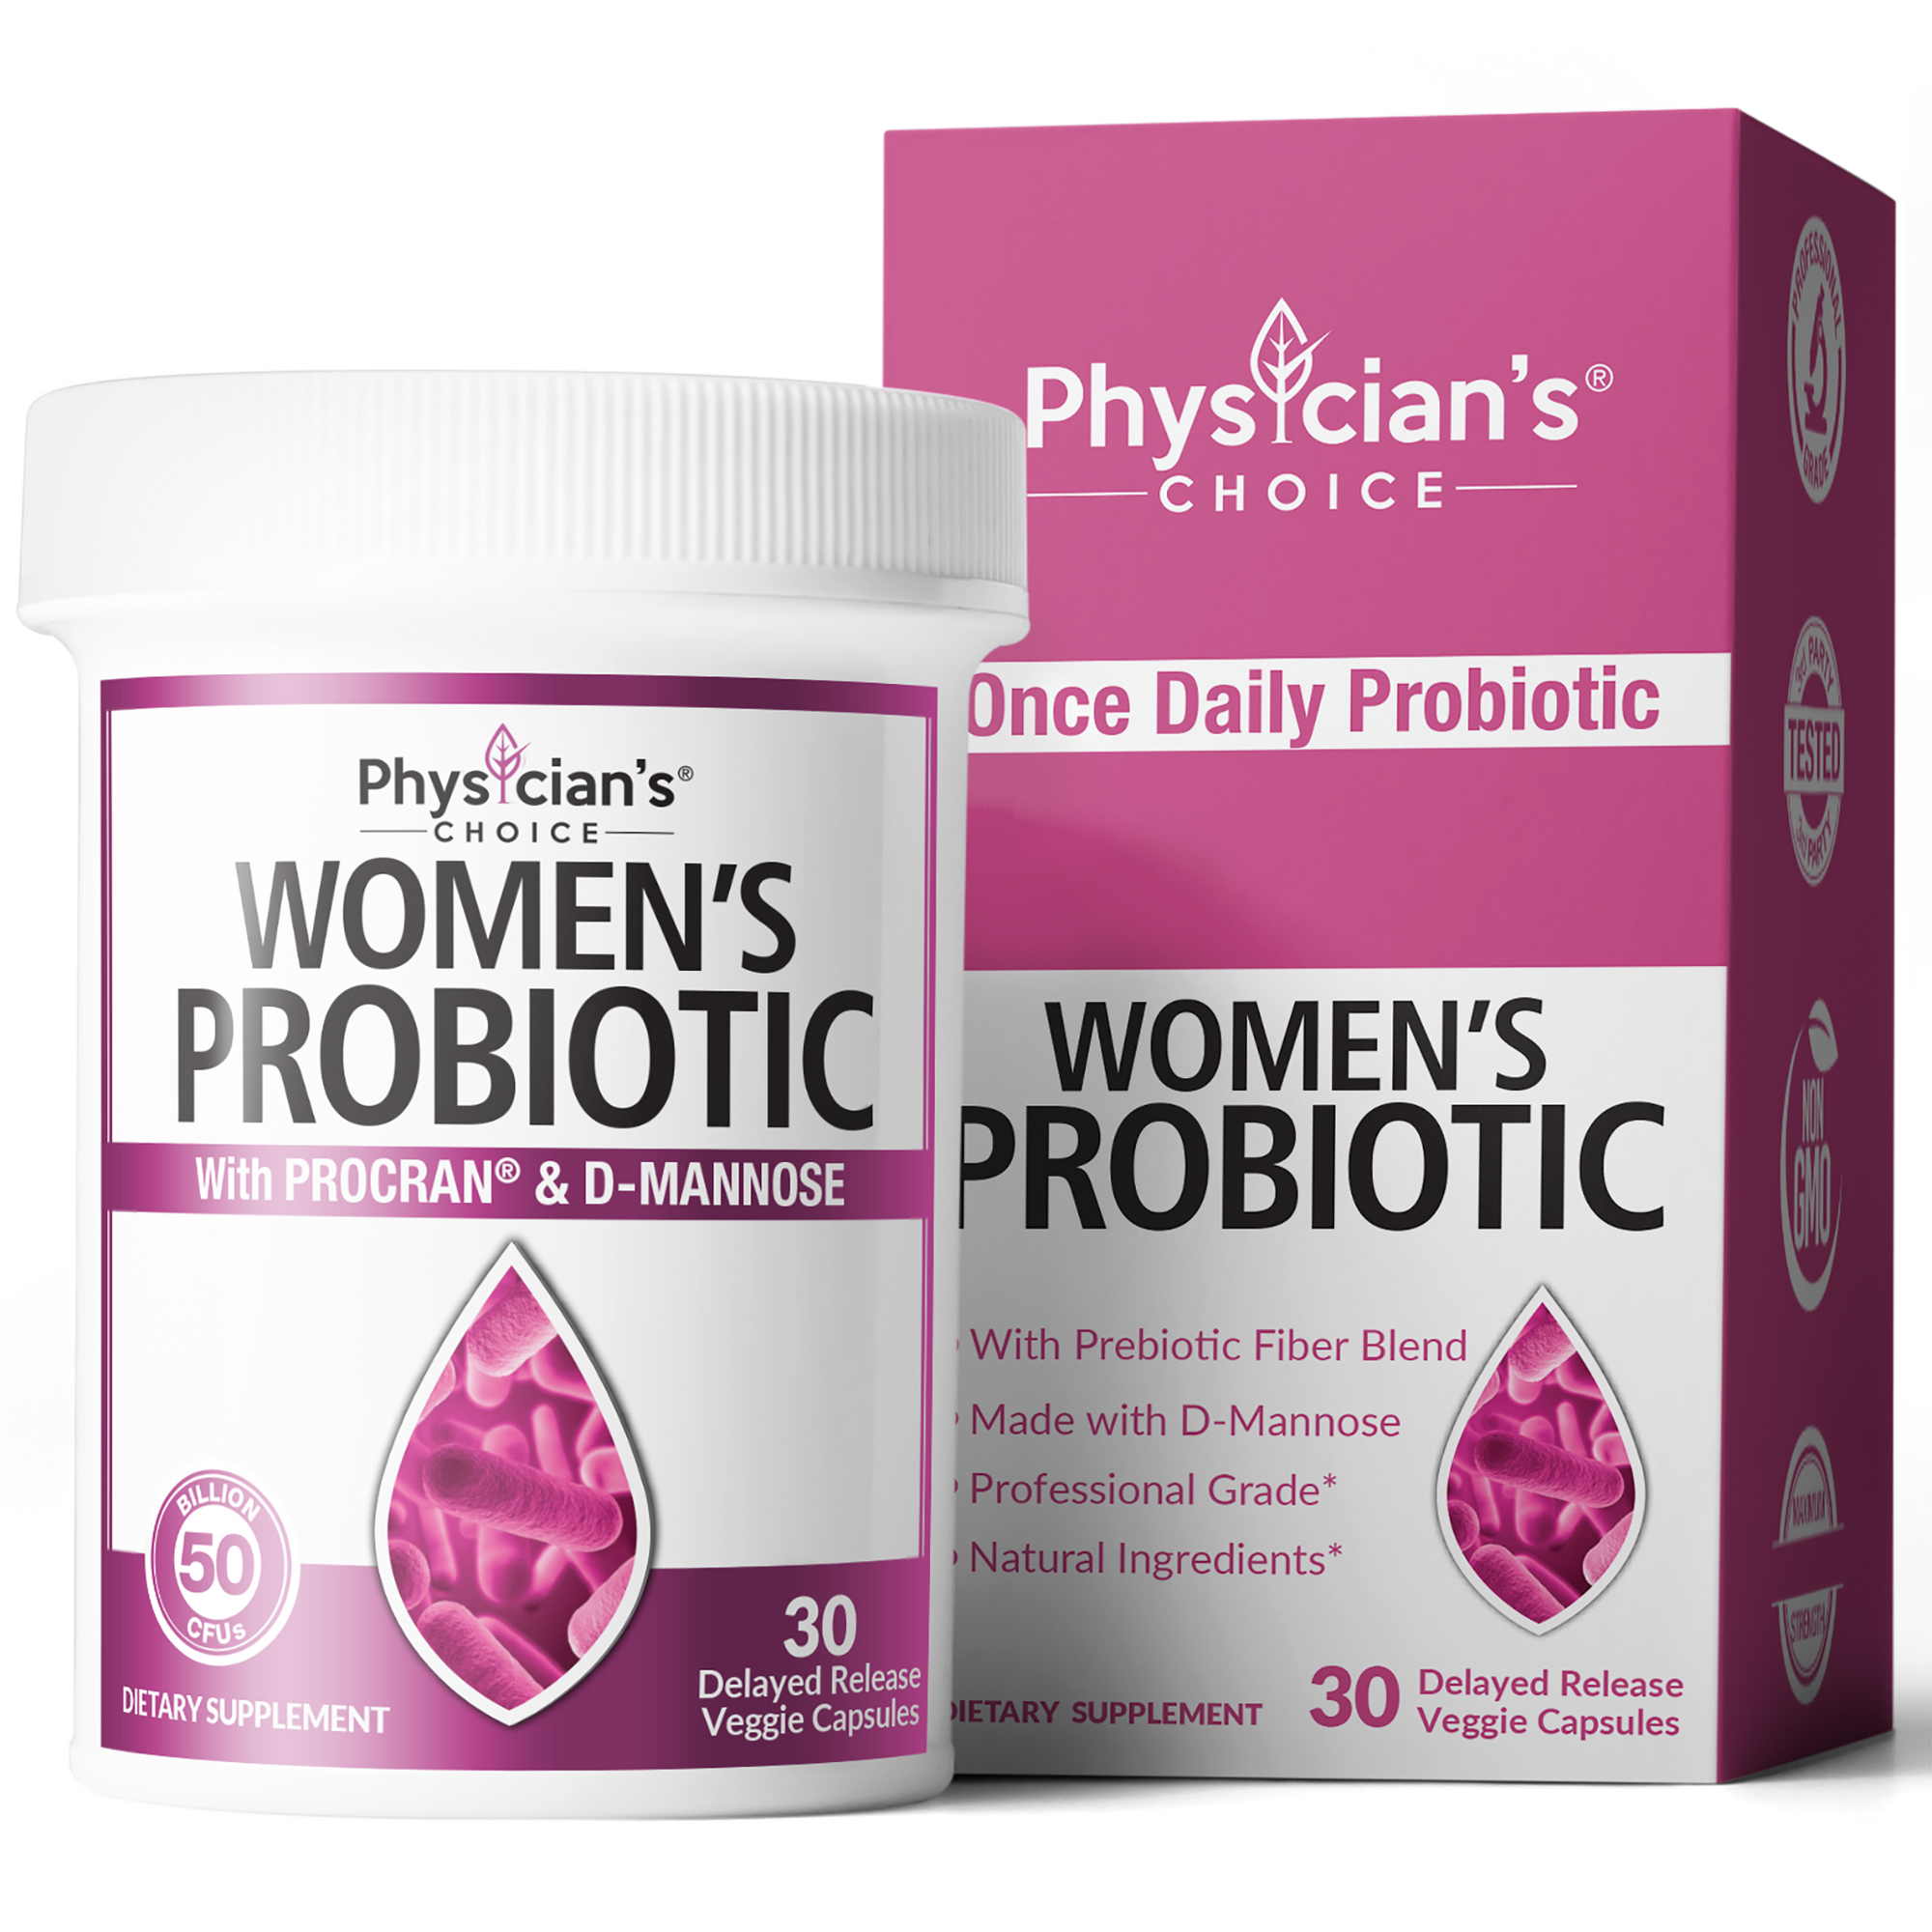 Physician's Choice Women's Probiotic With ProCran and D-Mannose 30-count bottle